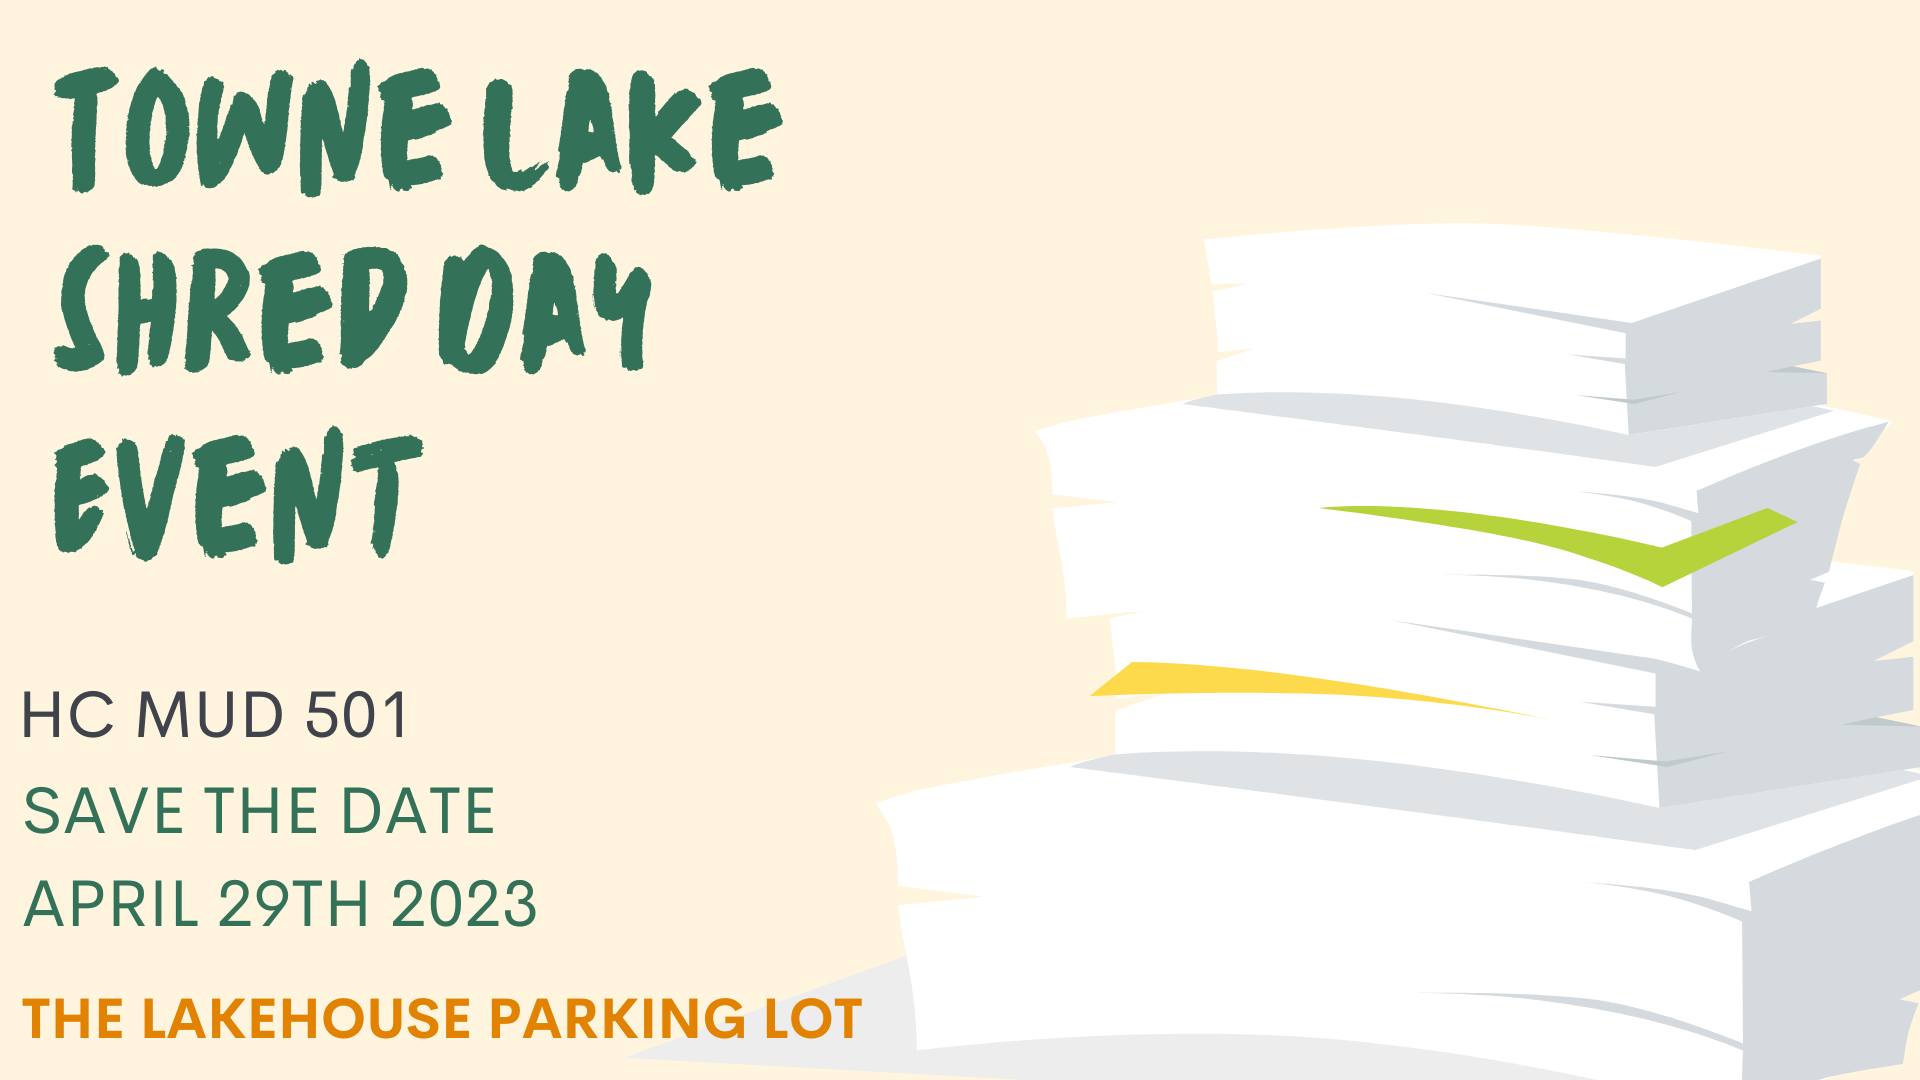 Towne Lake Shred Day Event - April 29th